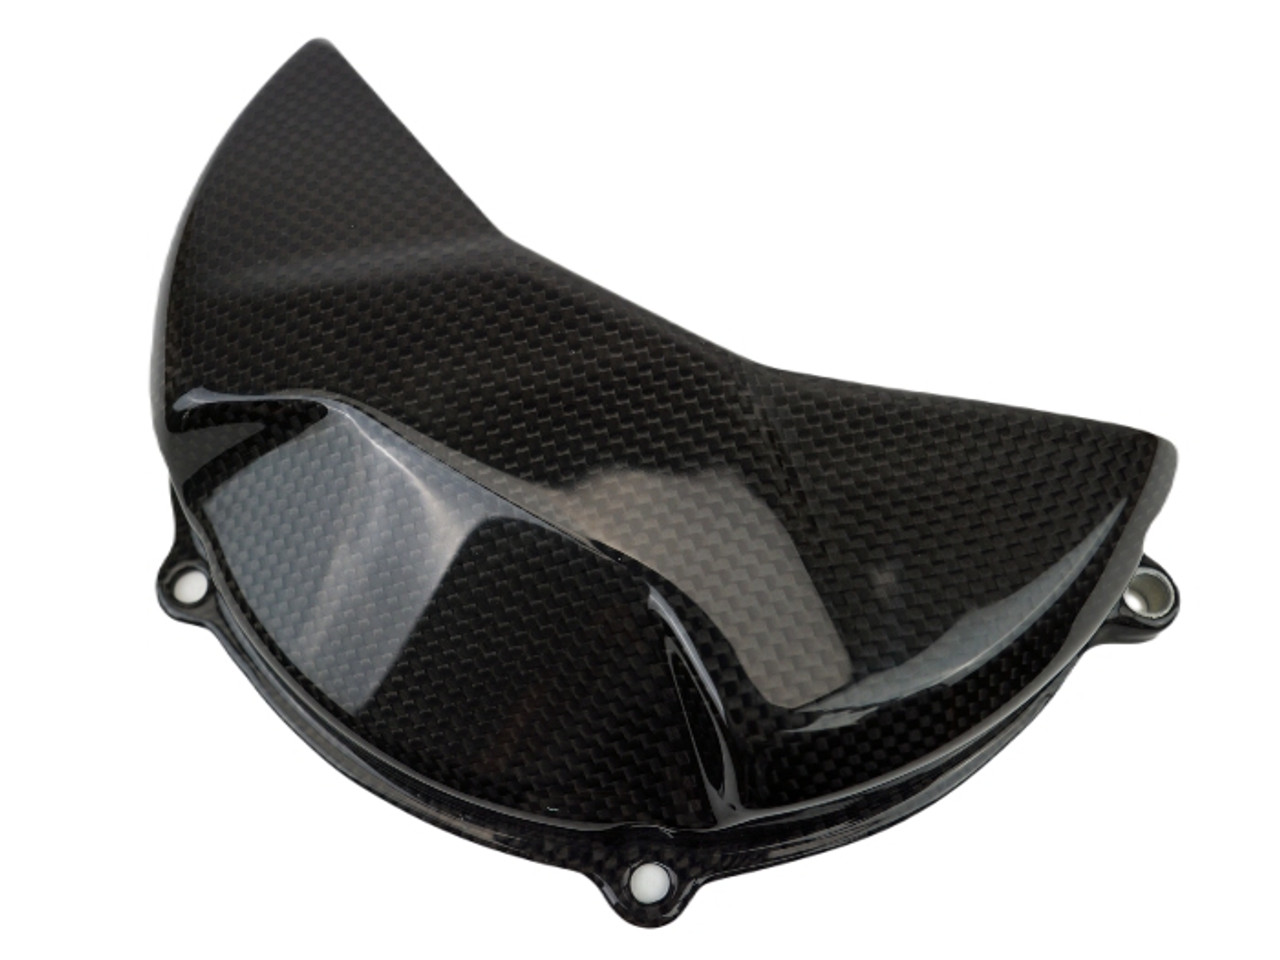 Clutch Cover Guard (Smaller) in Glossy Plain Weave Carbon Fiber for Ducati Streetfighter V4, Panigale V4